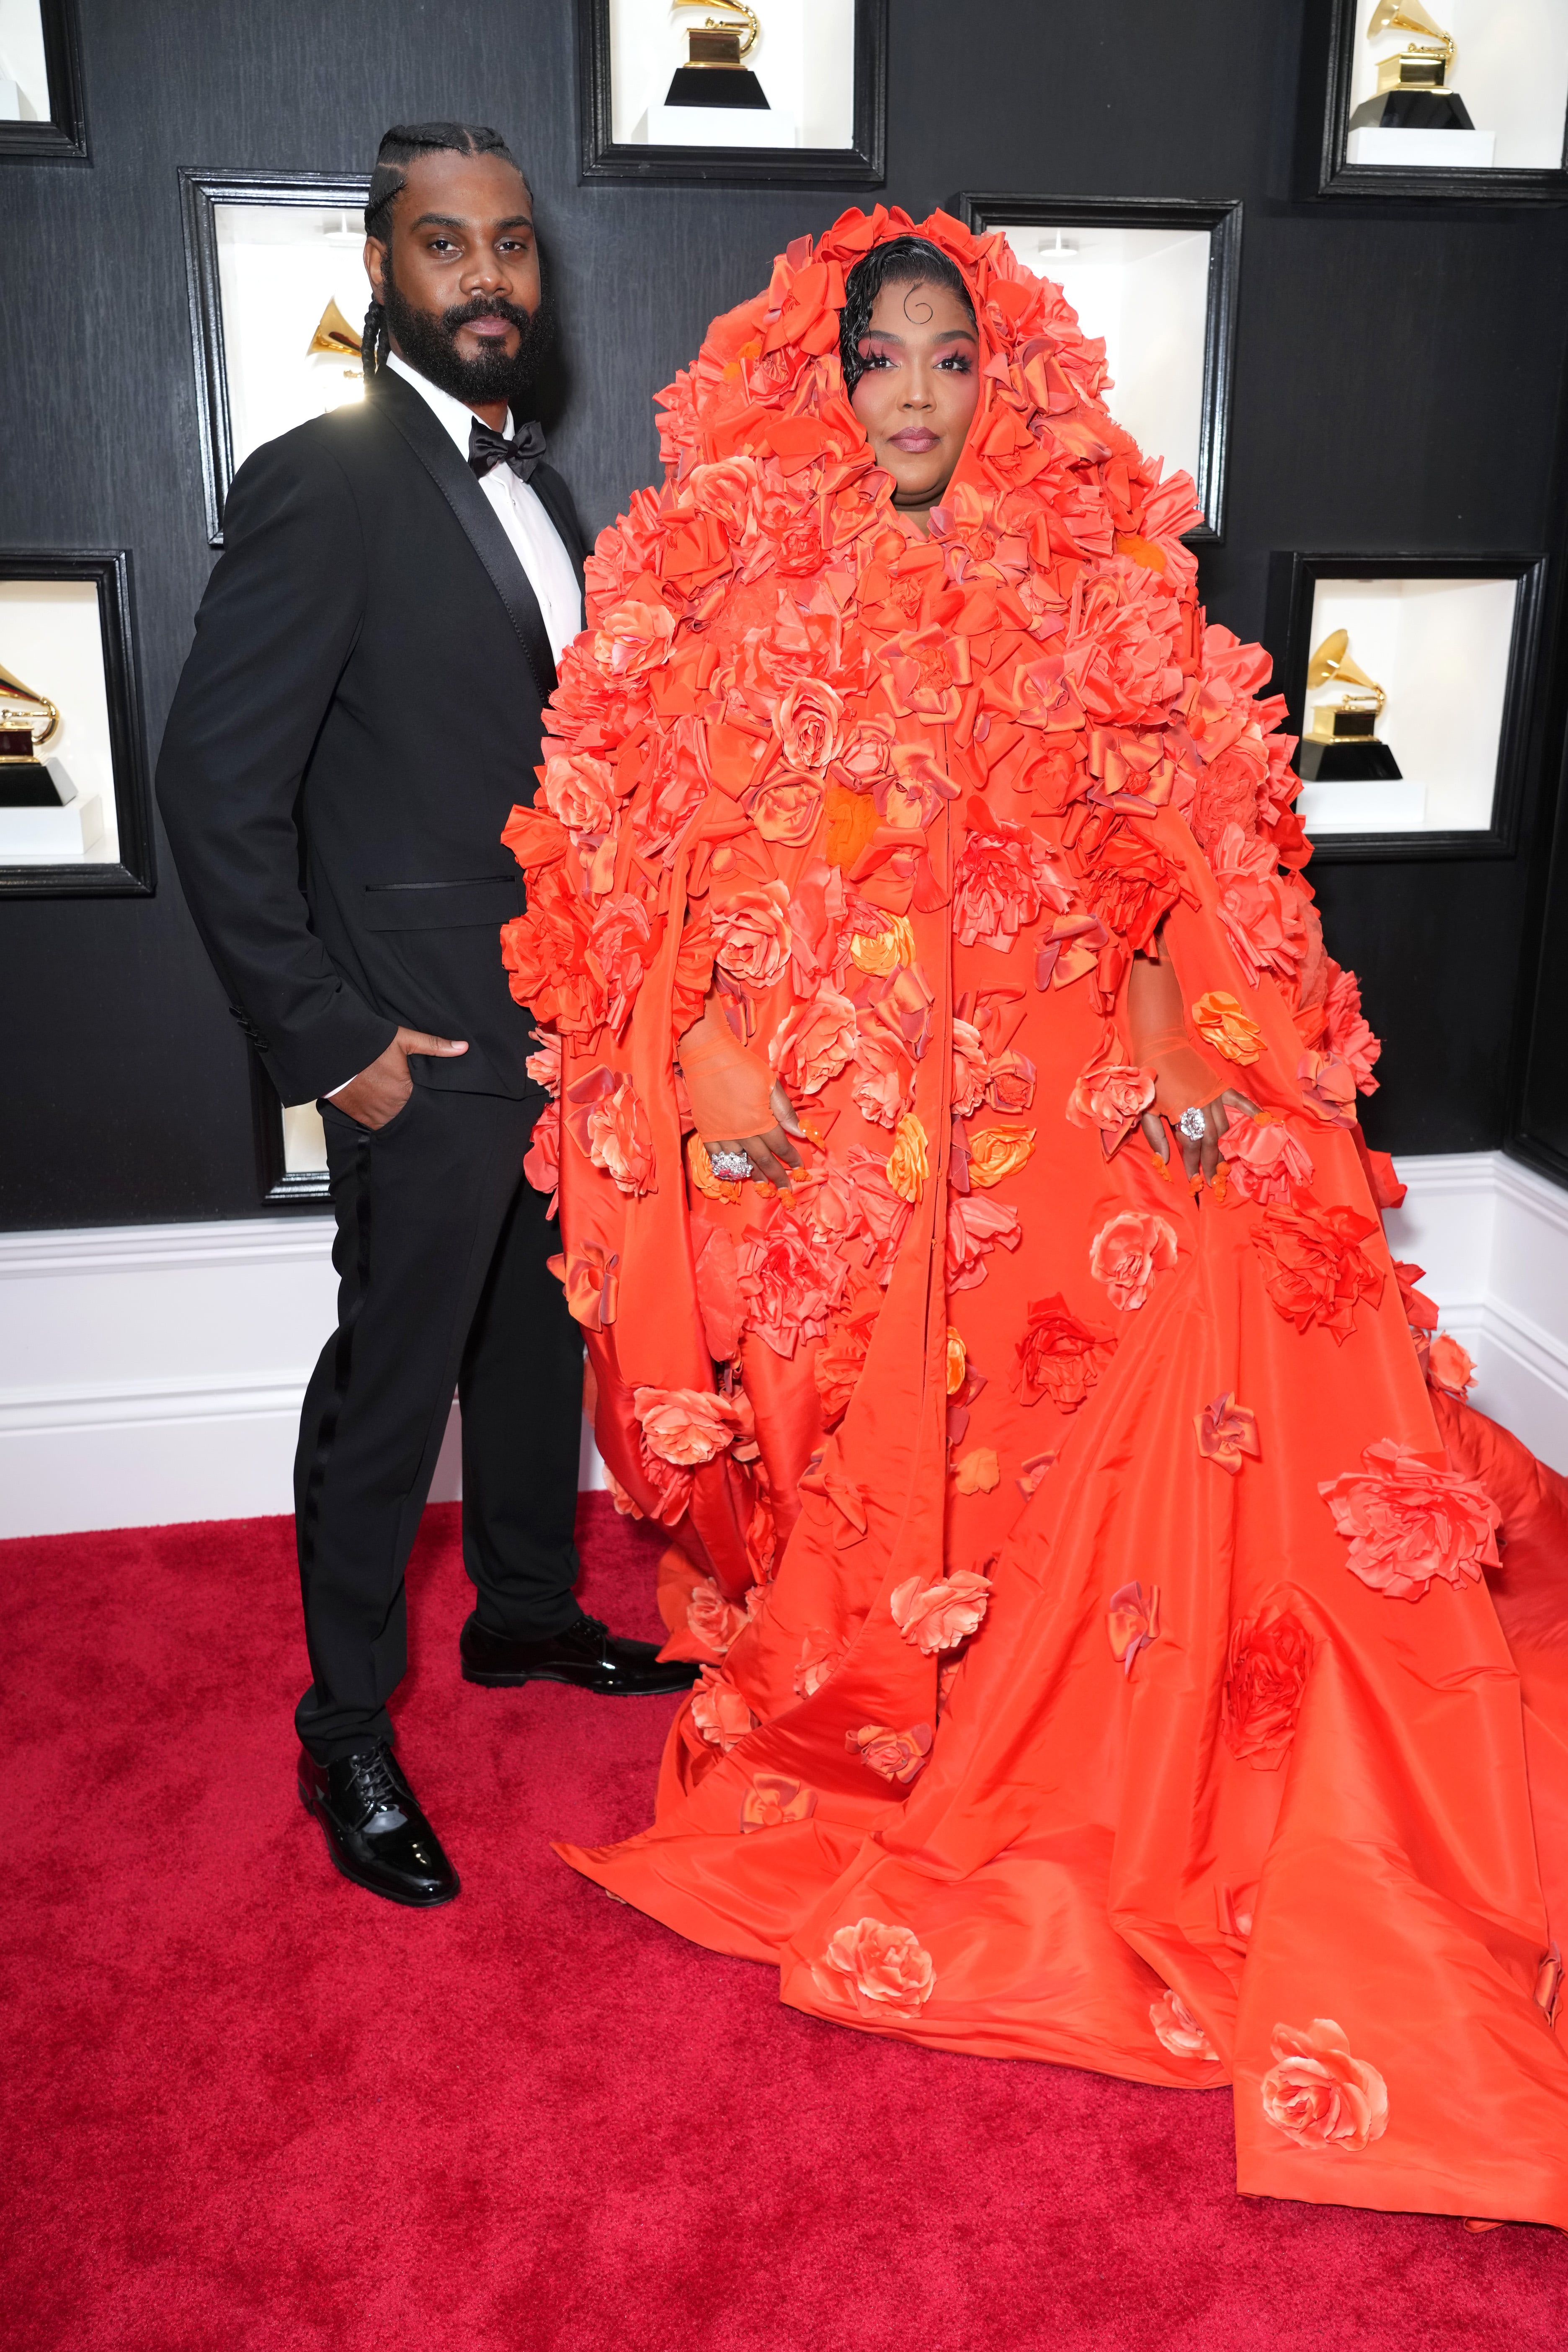 Grammys 2022: Hottest Couples on the Red Carpet